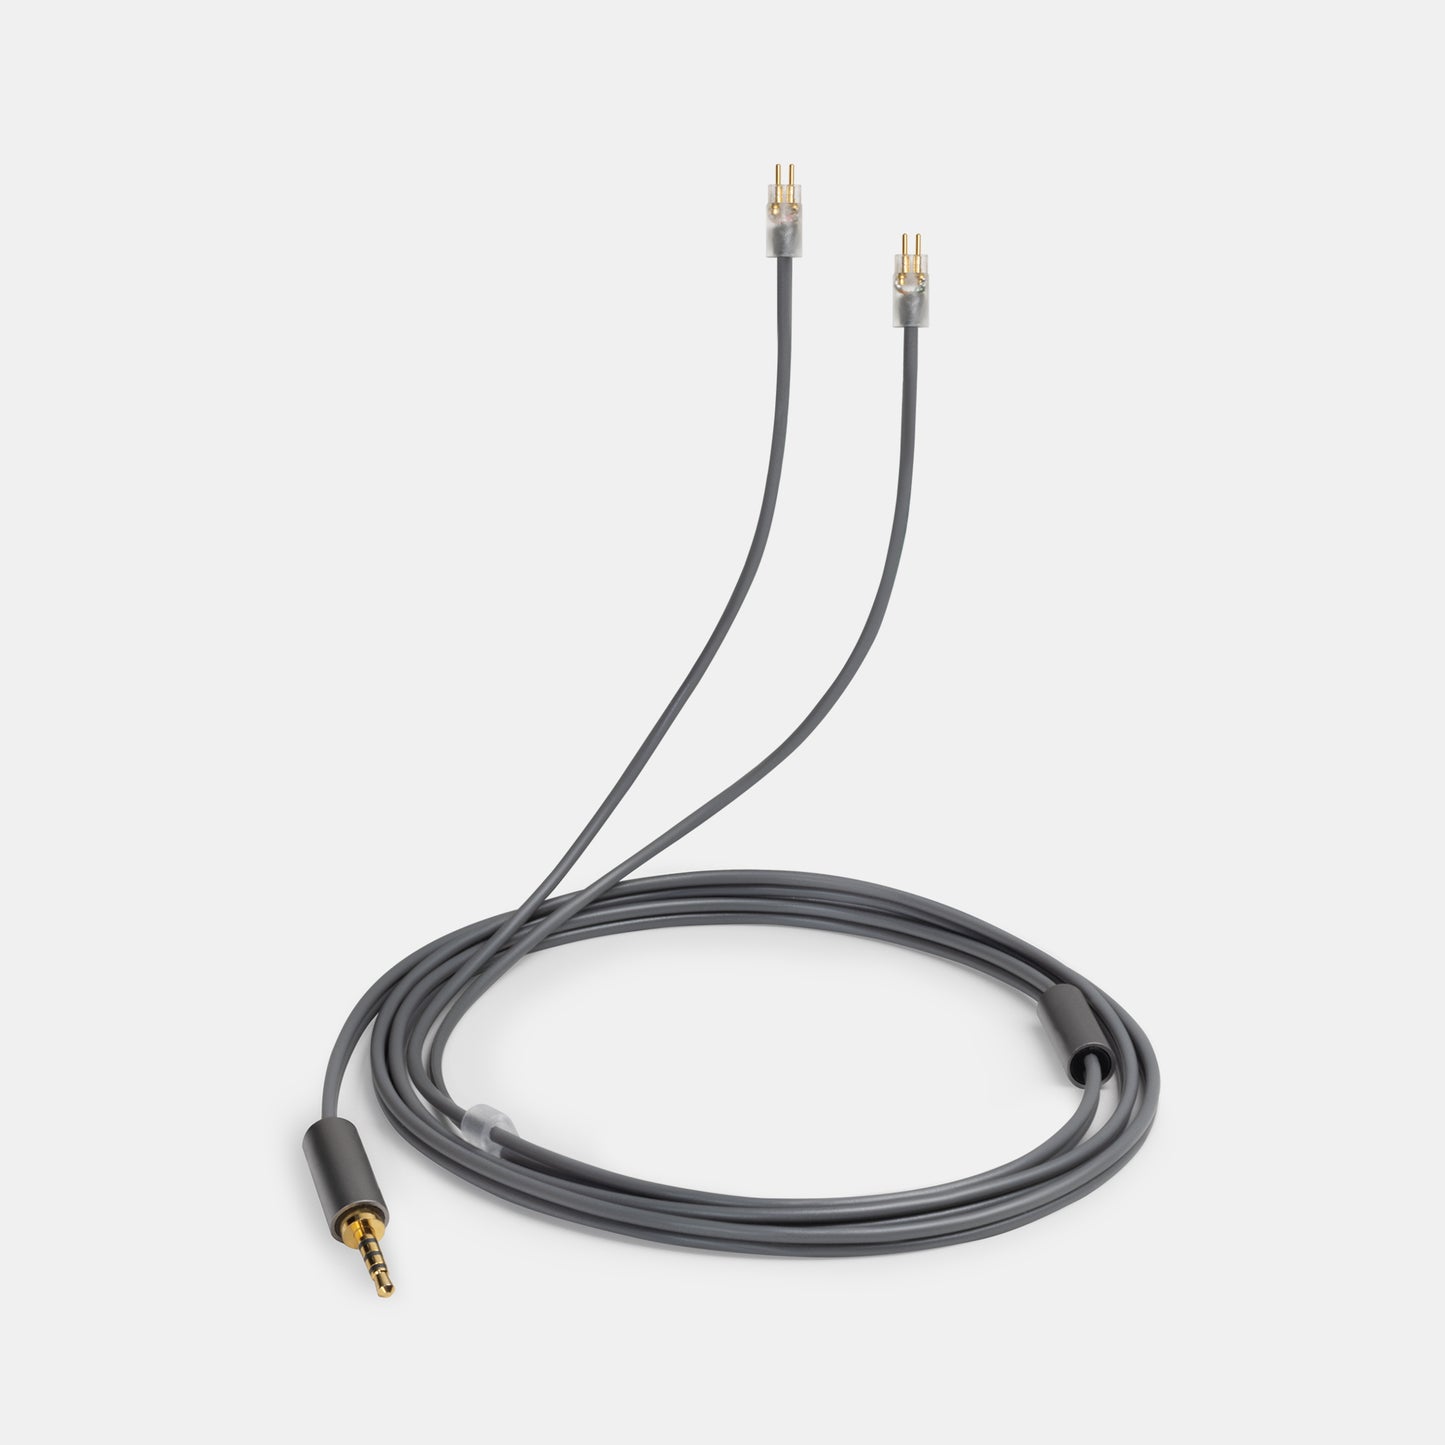 OEAudio MPC Cable with Plug Adapters